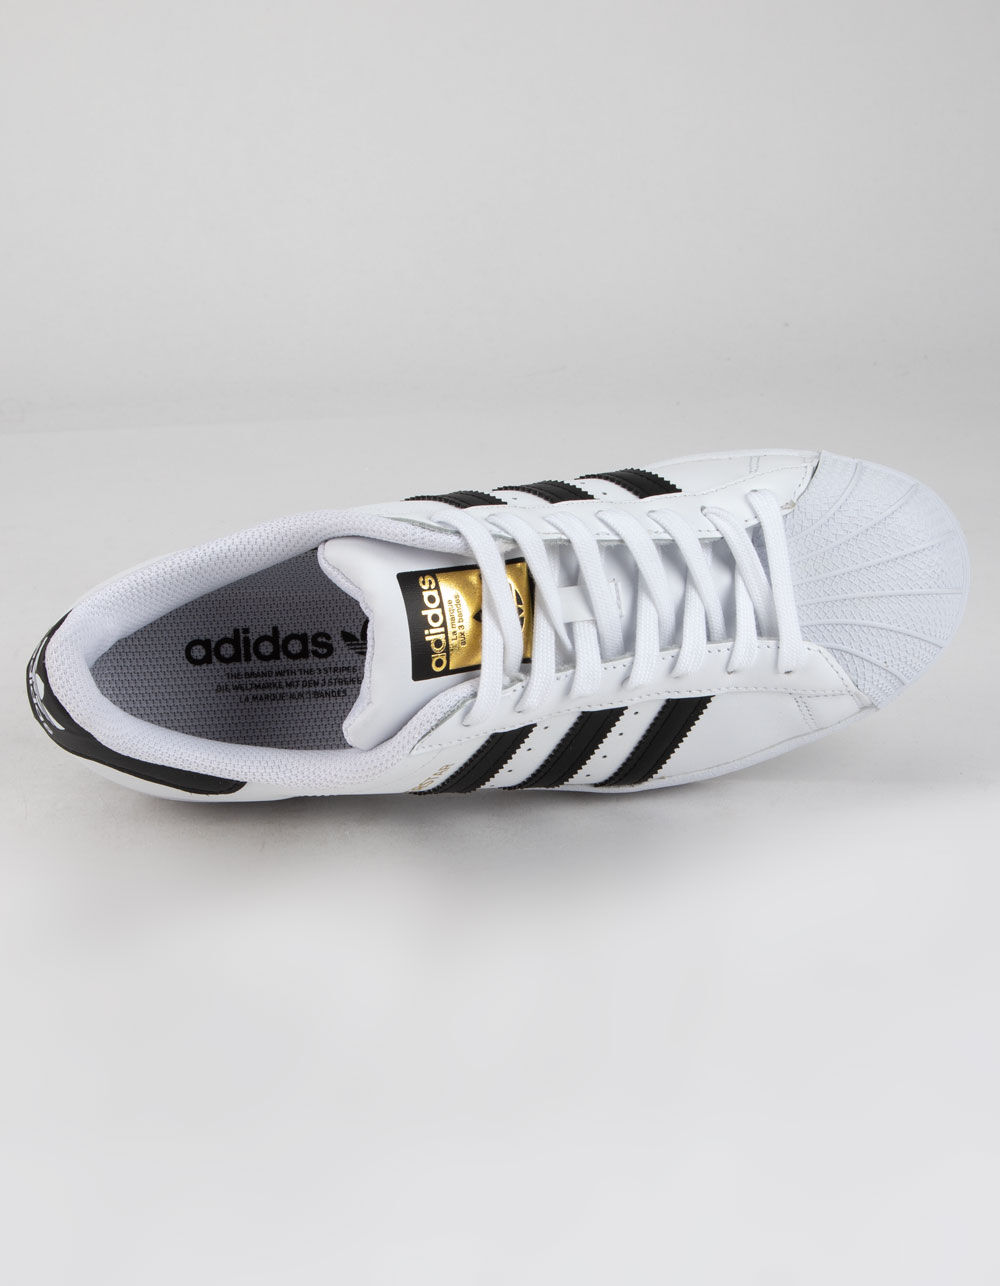 ADIDAS Superstar Womens Shoes   WHITE/BLACK   Tillys